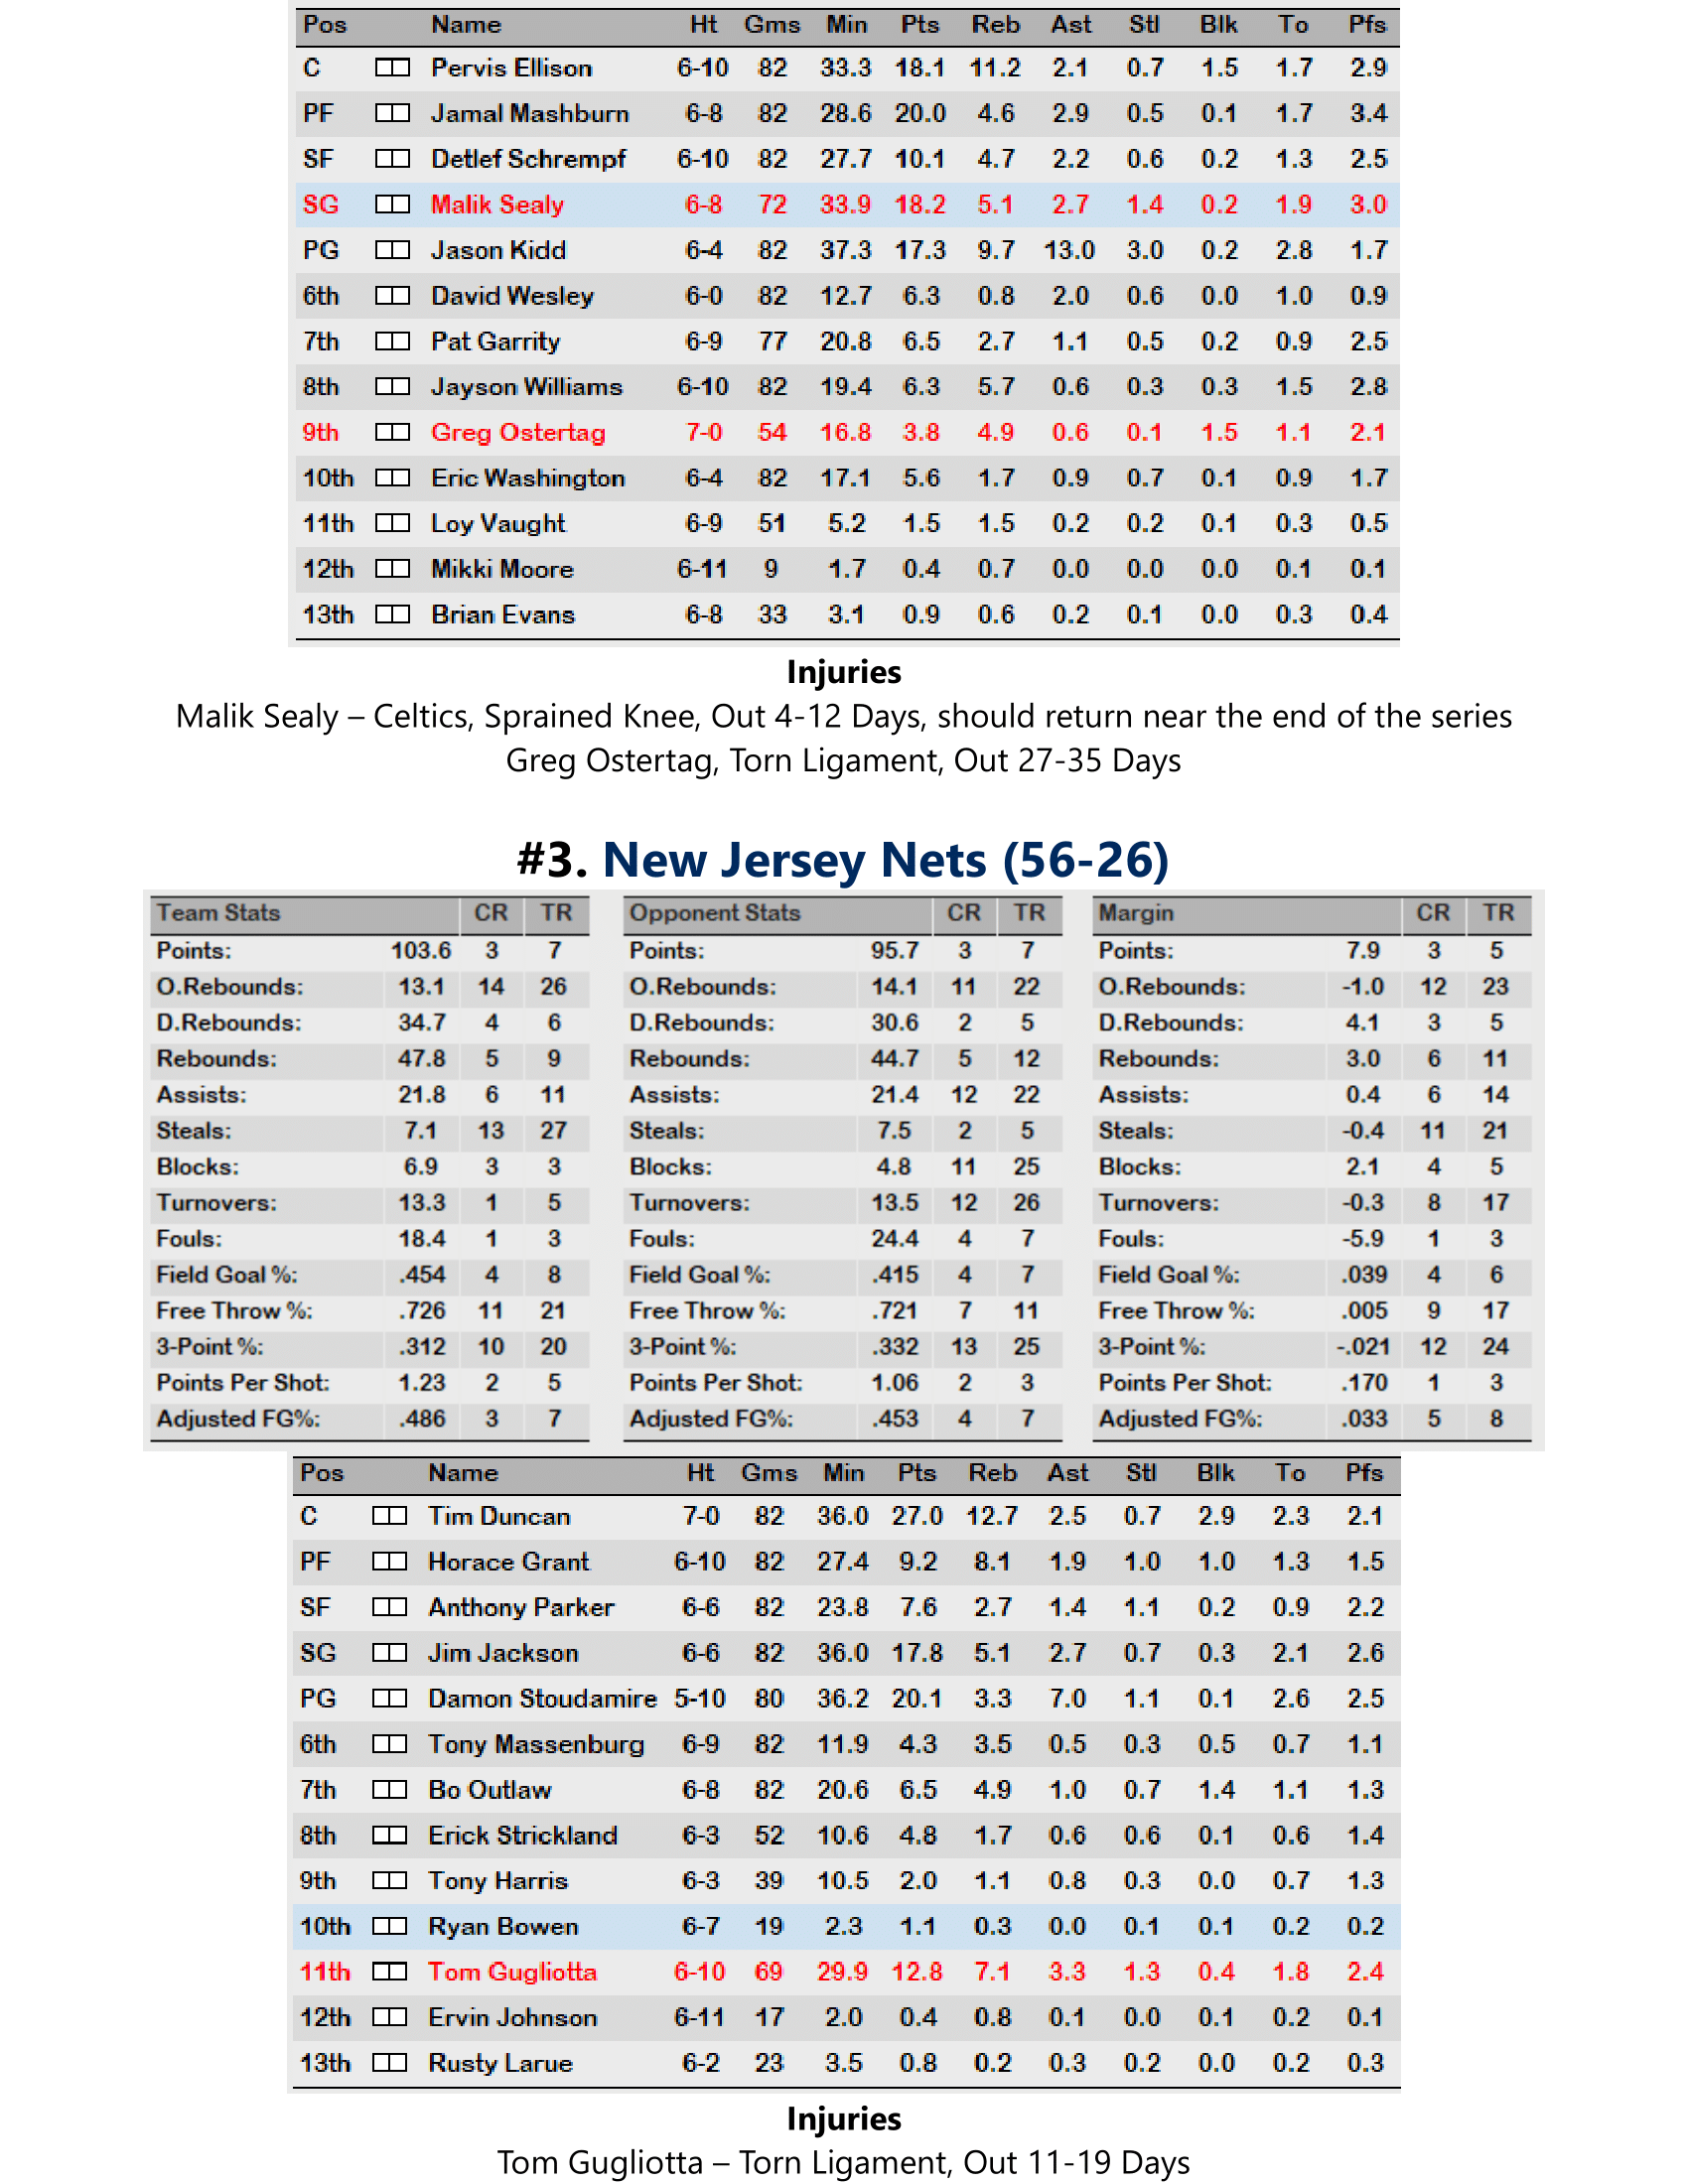 98-99-Part-3-Playoff-Preview-09.png